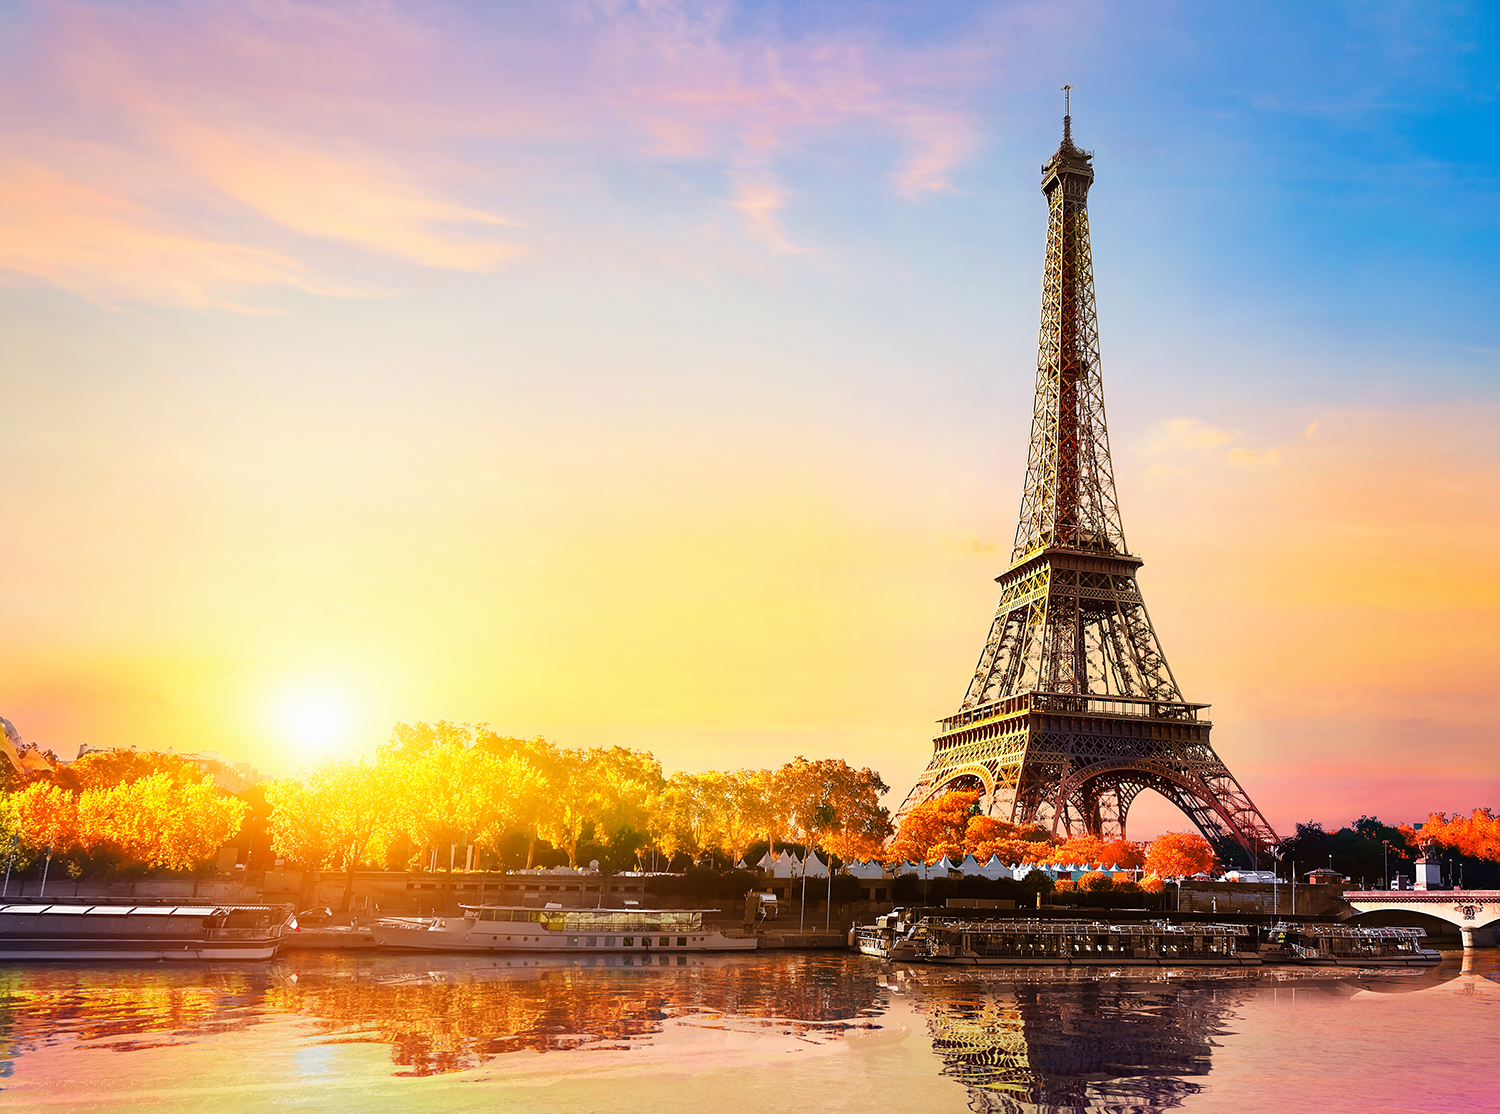 The Eiffel Tower is located on the shores of the Seine